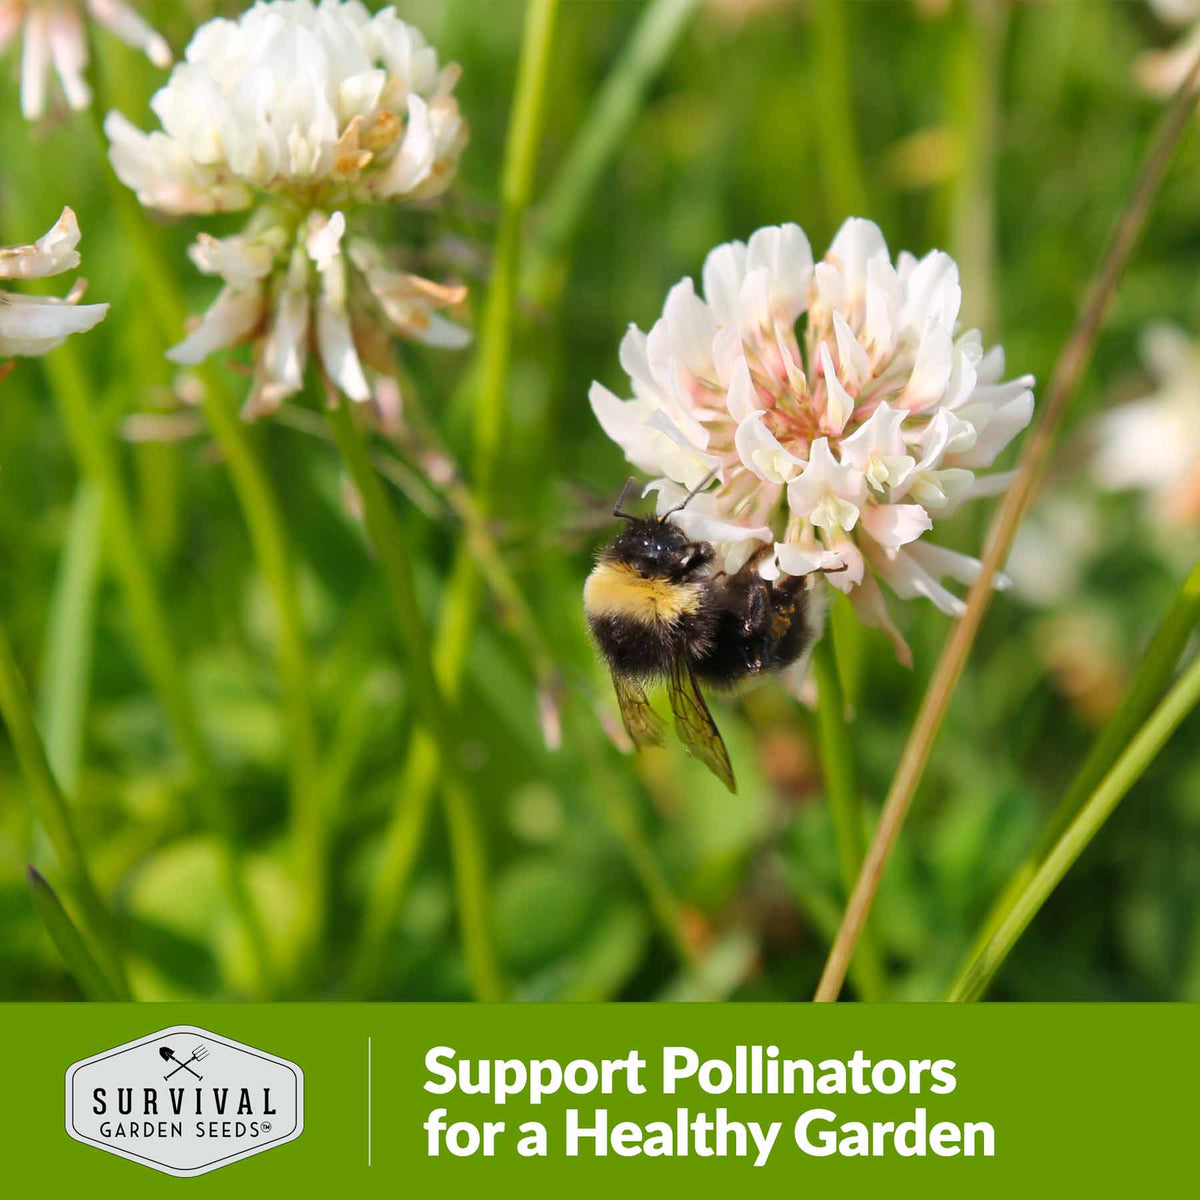 Clover will help support pollinators for a healthy garden